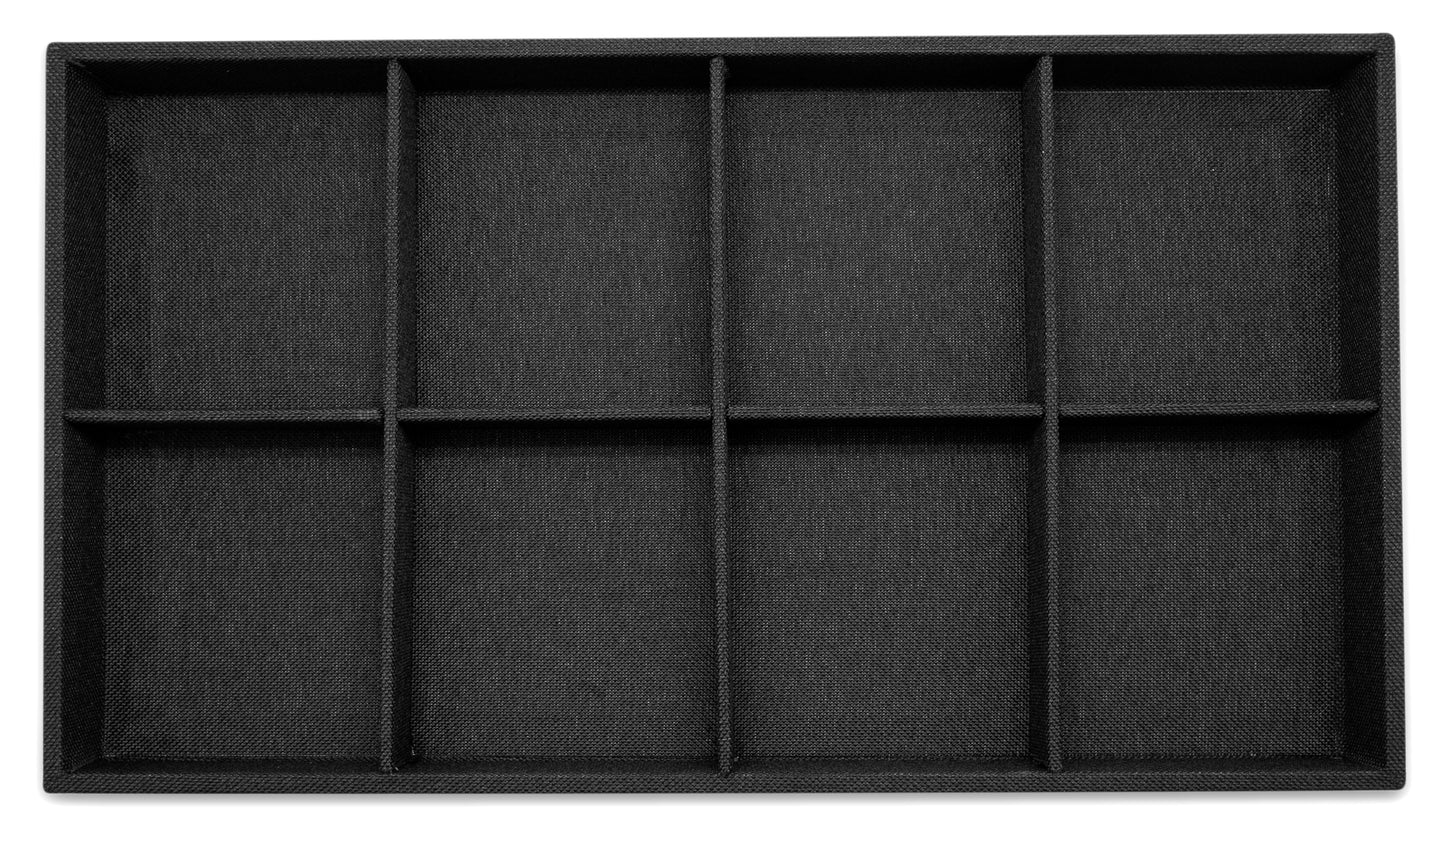 Black Linen 8 Compartment Stackable Jewelry Display Tray